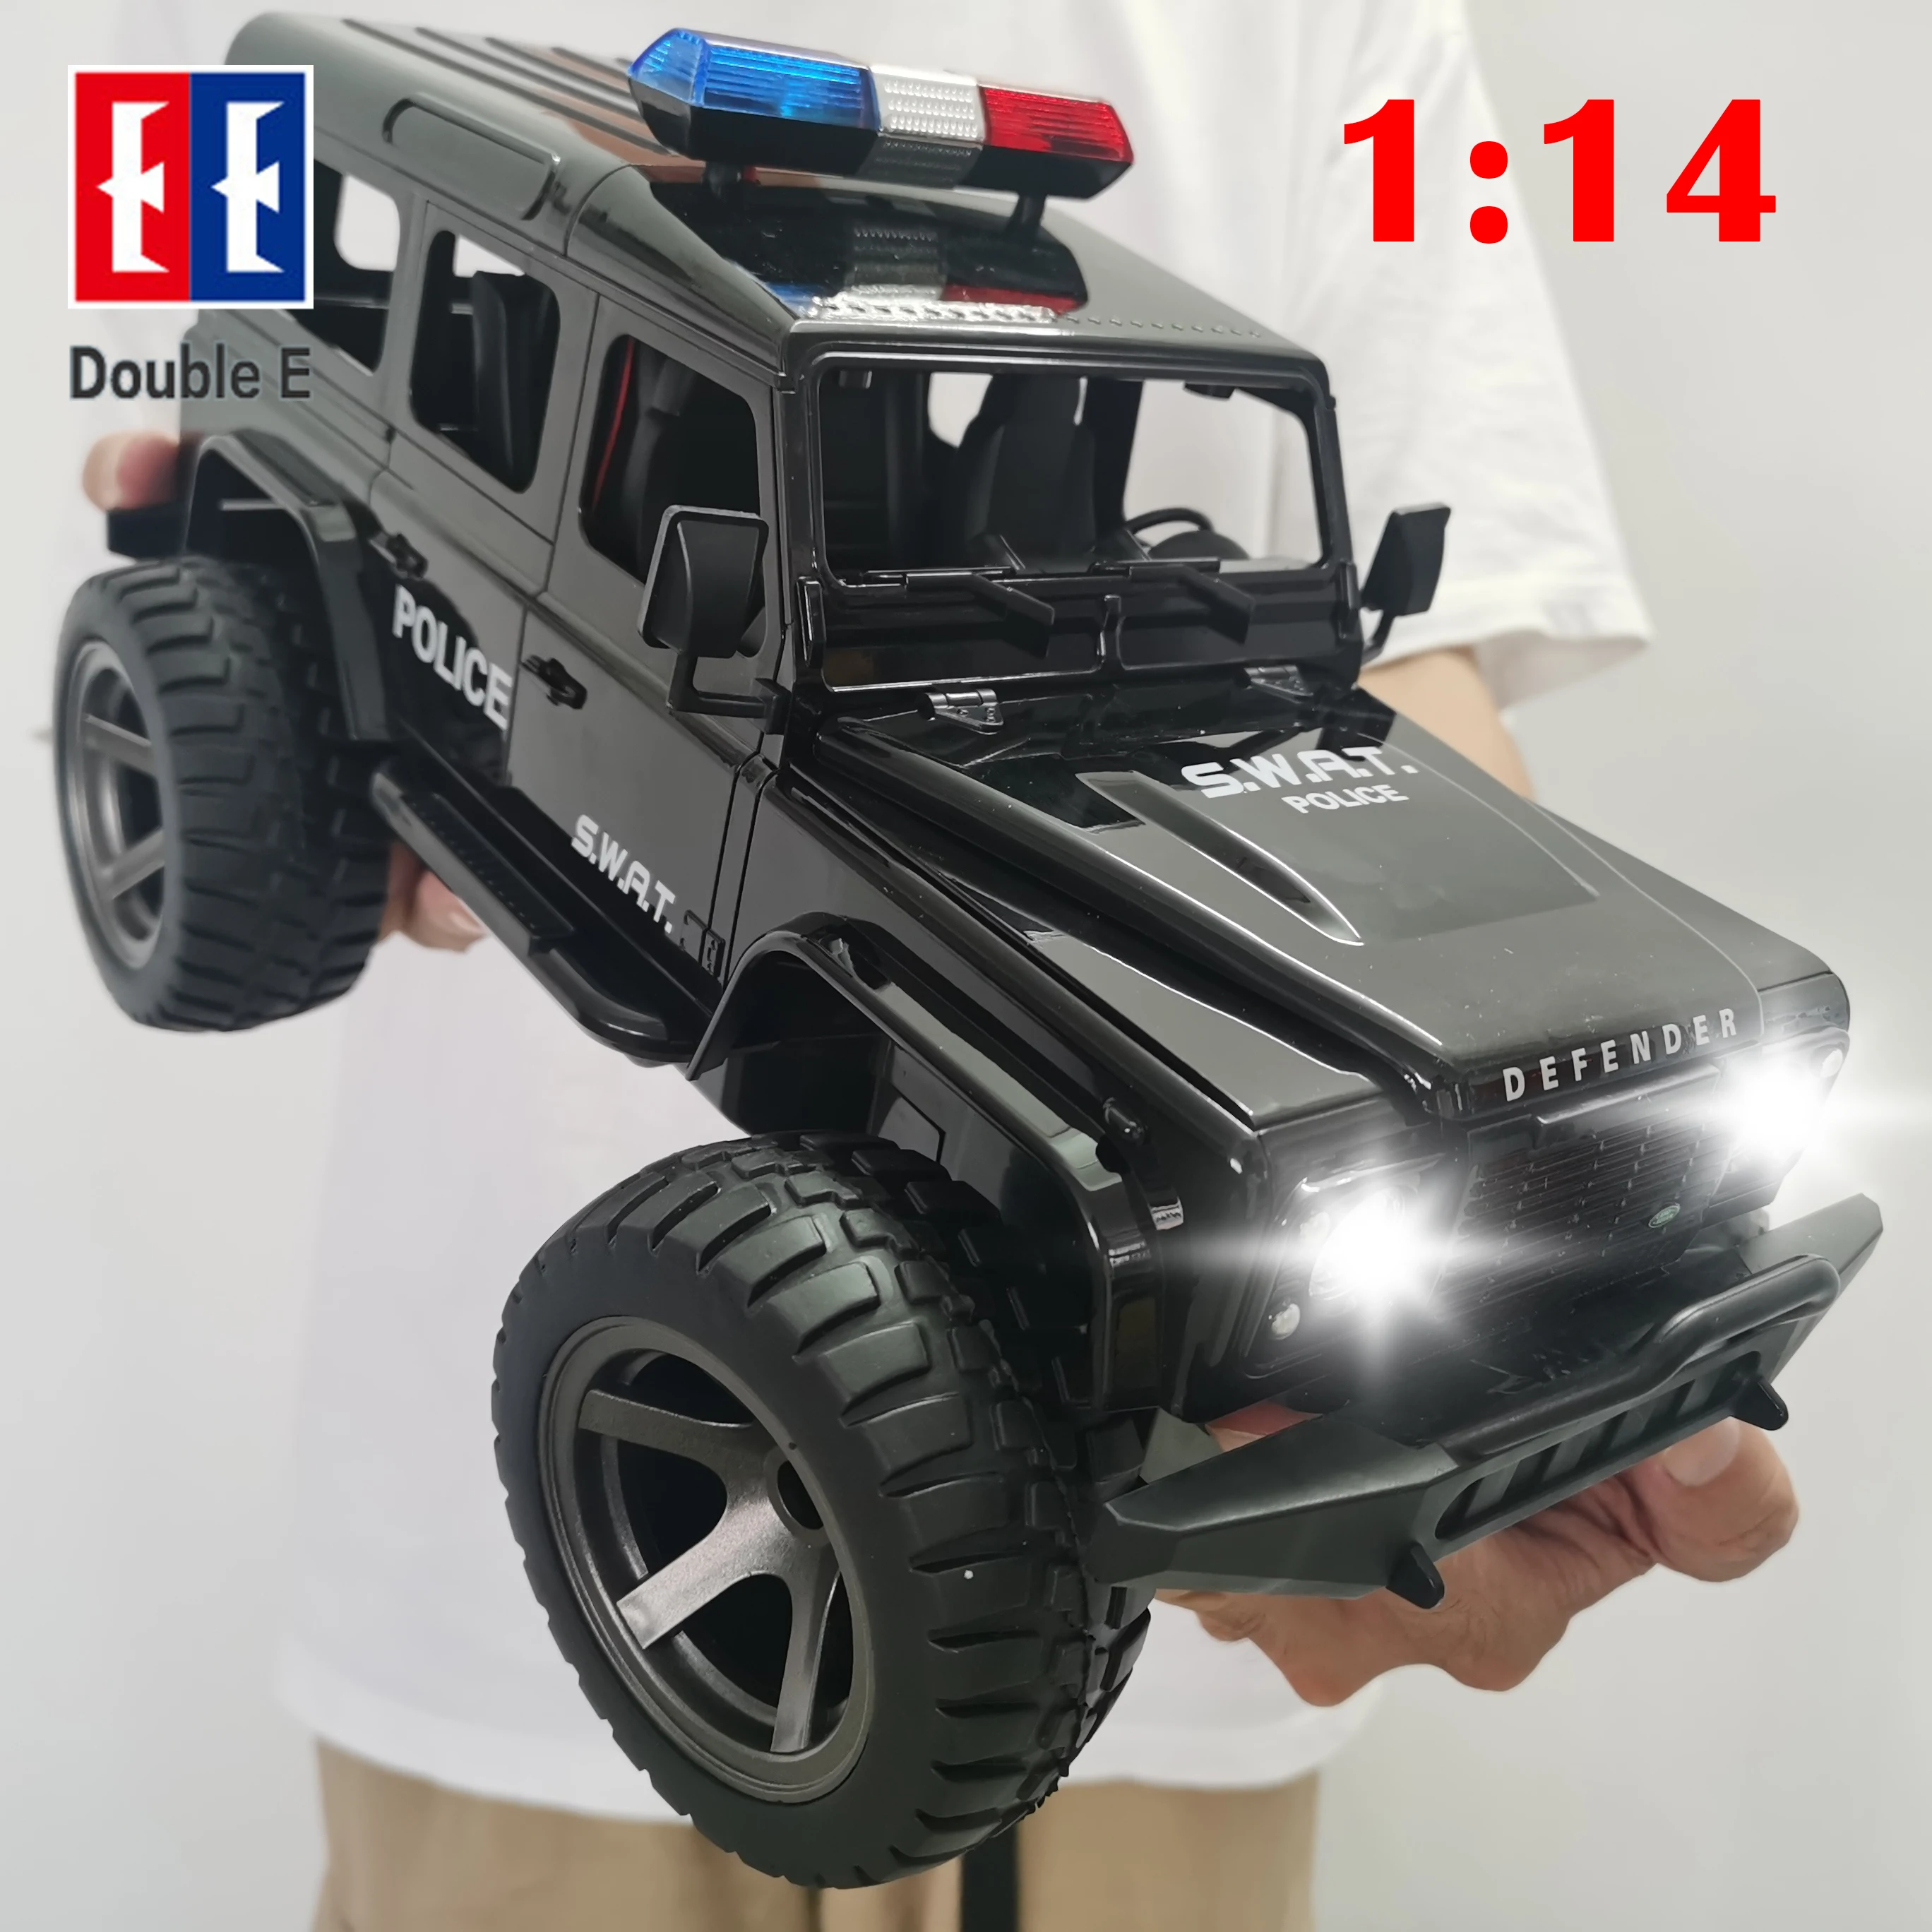 Enlarge 1/14 Big 2.4GHz Super Fast Police RC Car Remote Control Cars Toy with Lights Durable Chase Drift Vehicle toys for Boys Kid Child